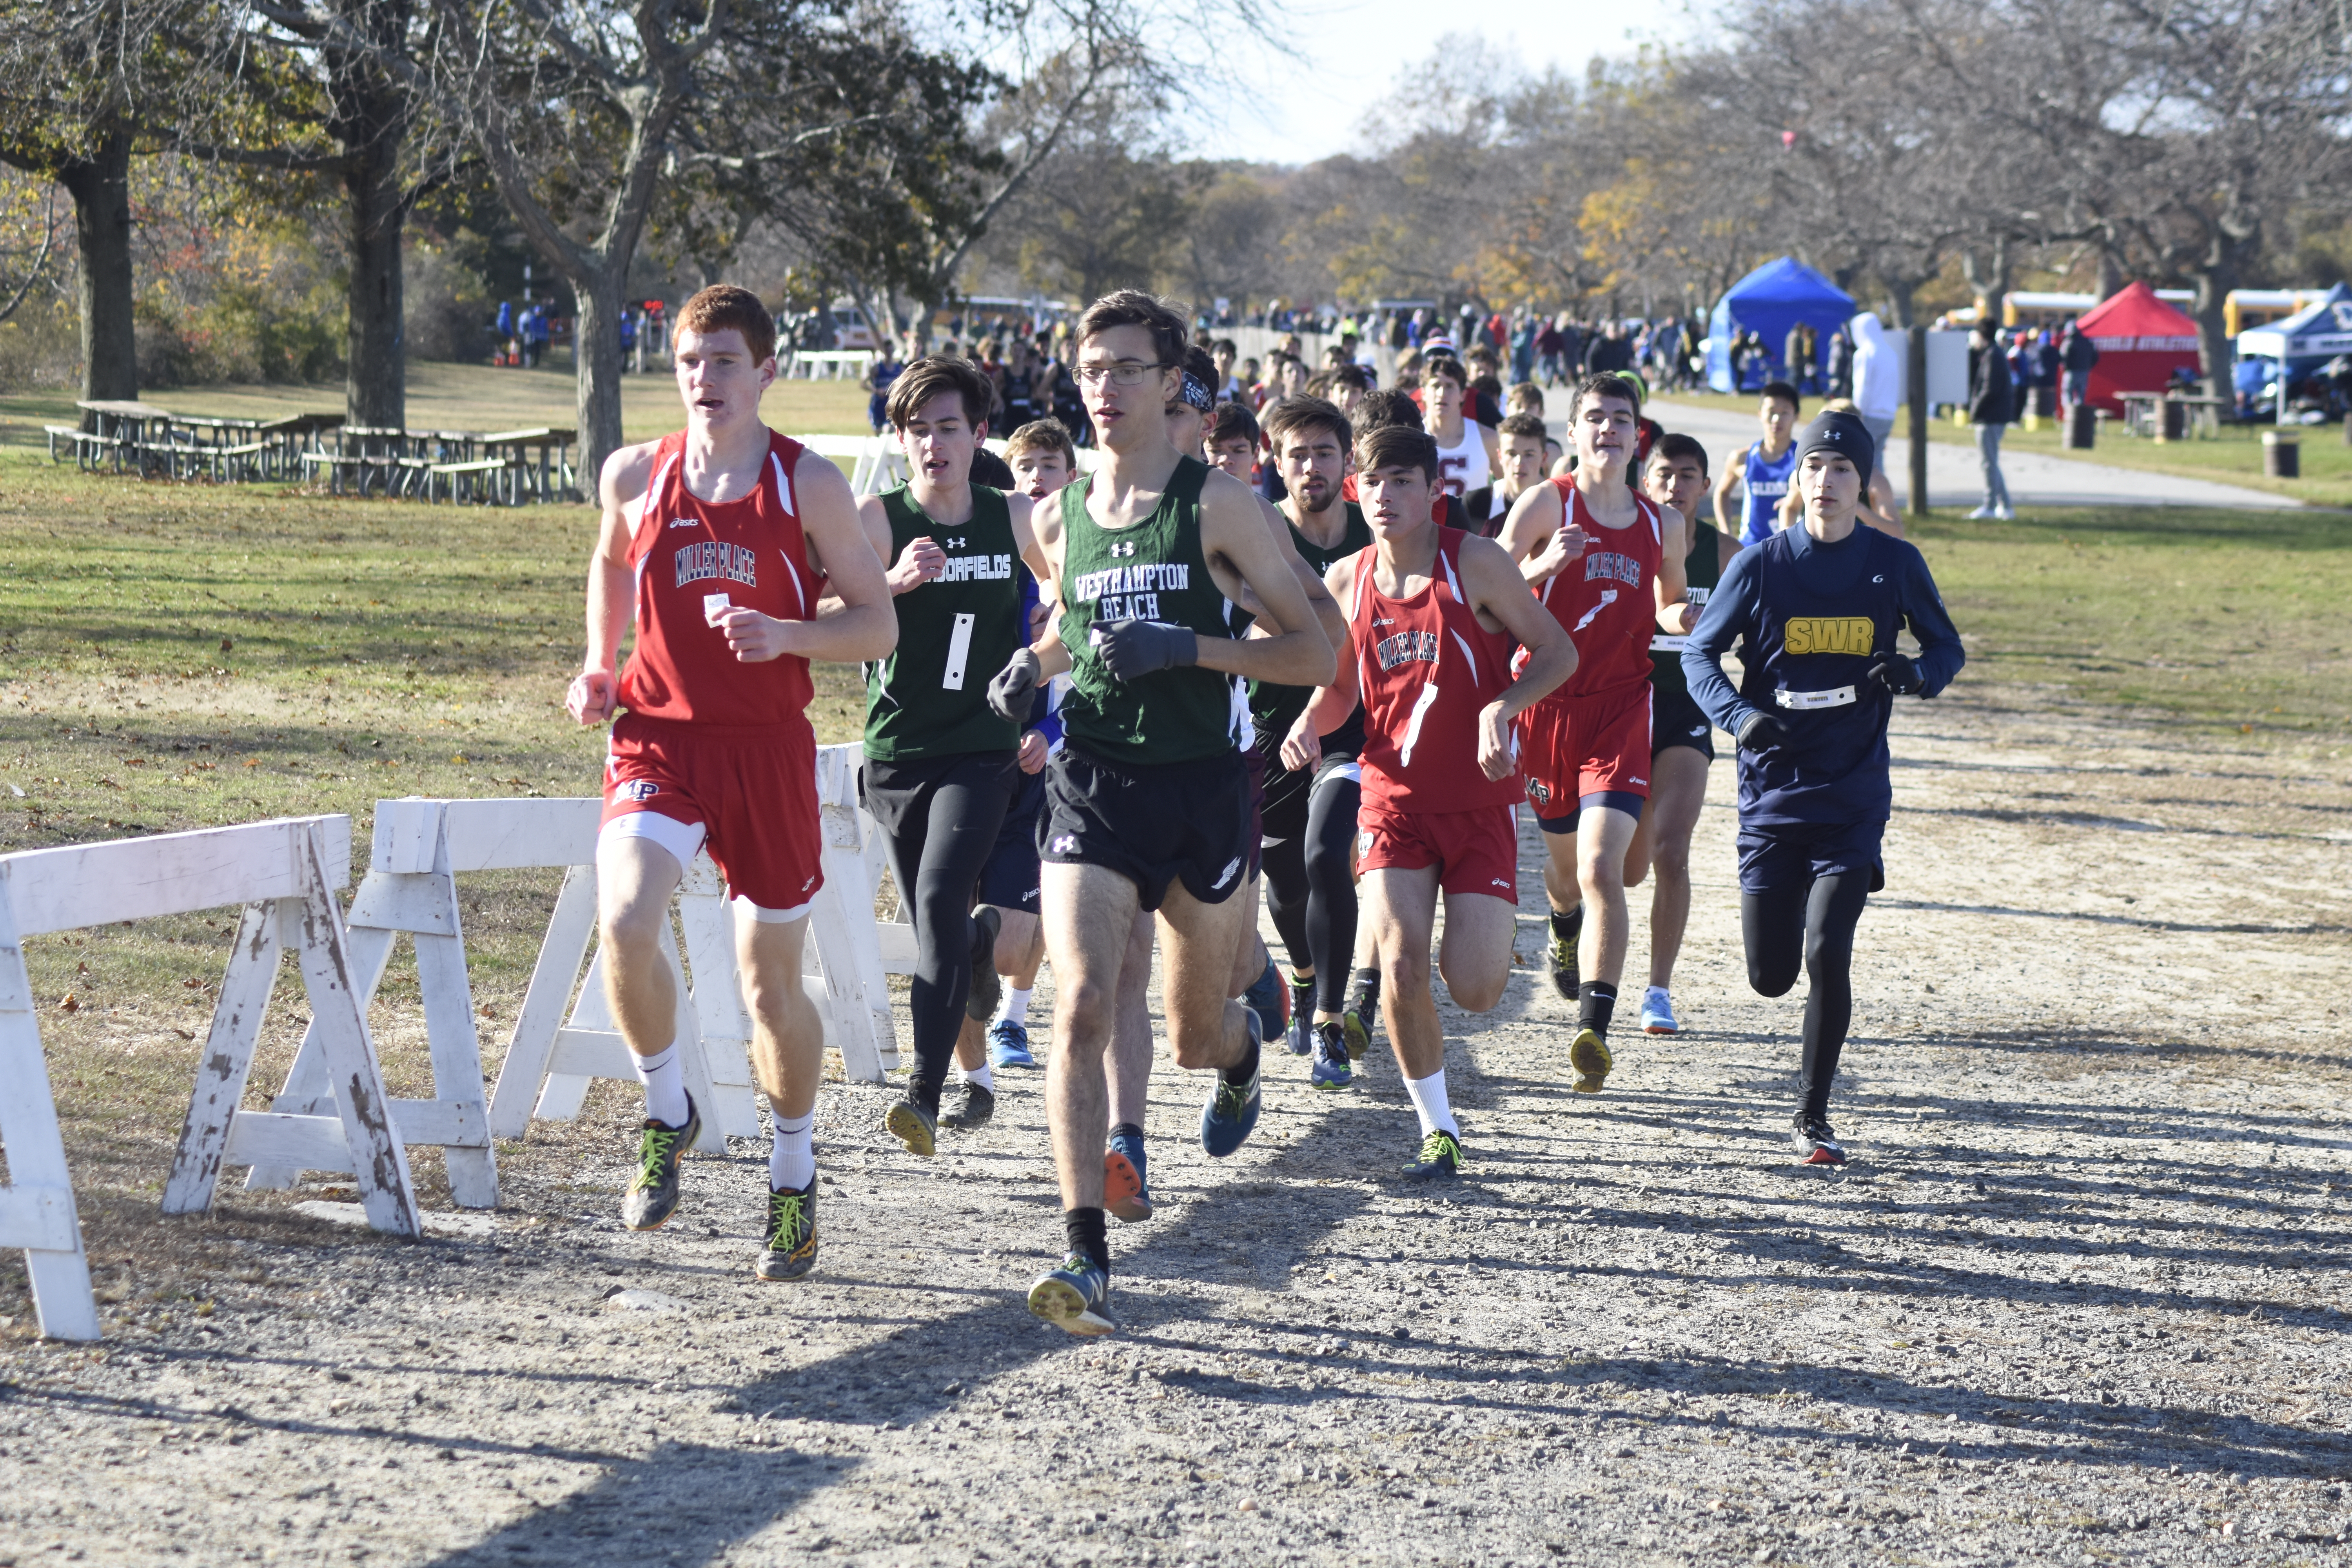 Gavin Ehlers of Westhampton Beach brings out the pack of runners quickly to start the race.